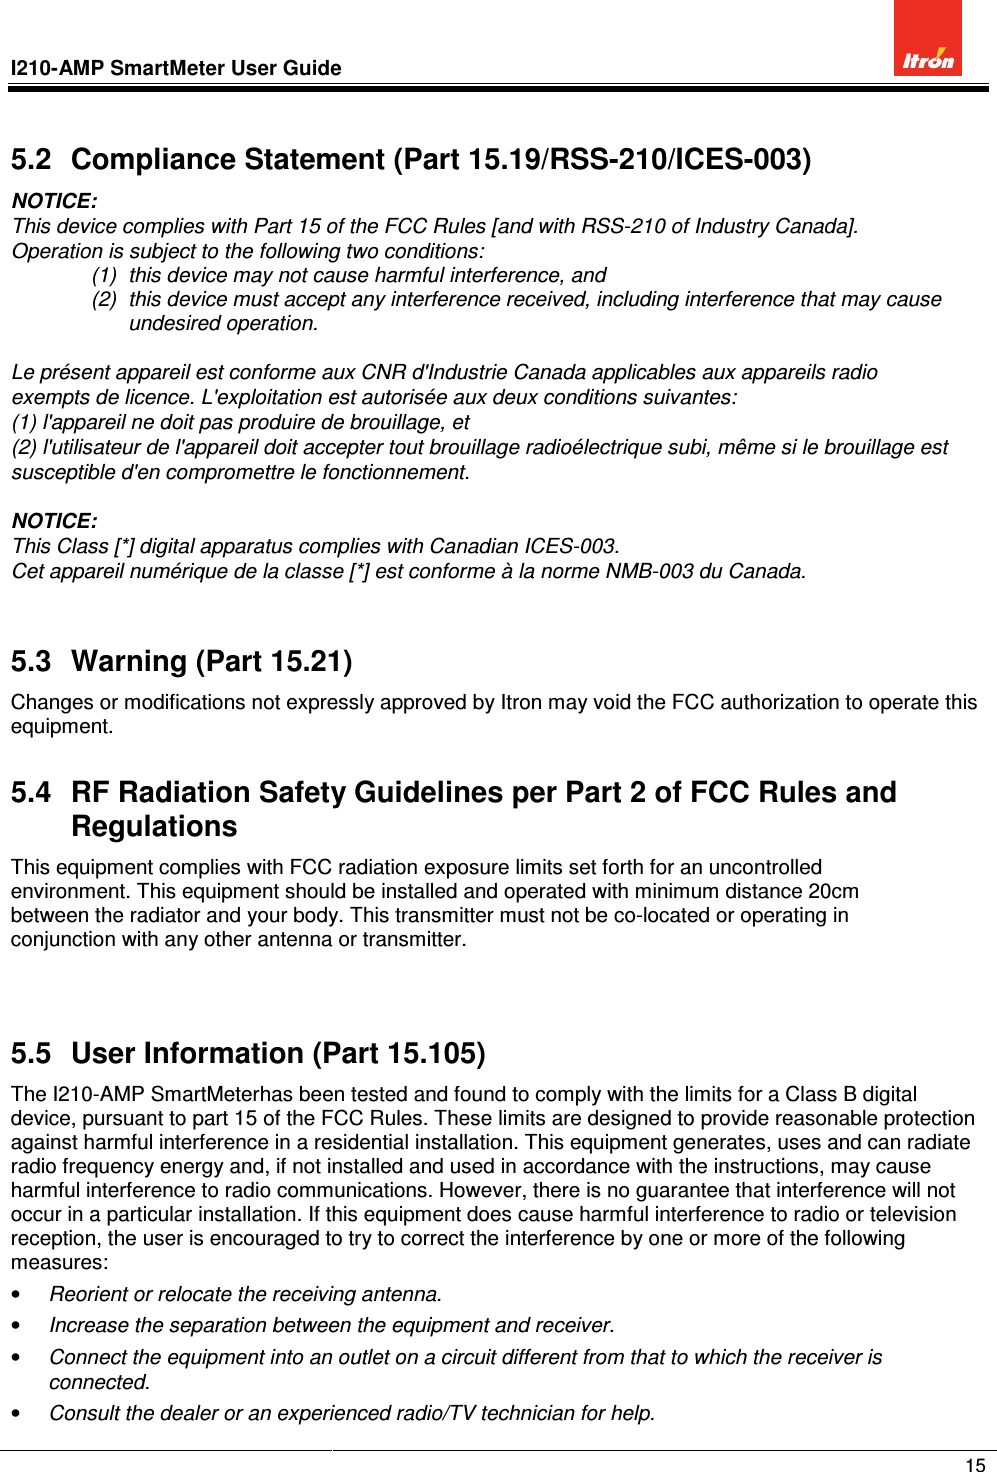 I210-AMP SmartMeter User Guide               15  5.2  Compliance Statement (Part 15.19/RSS-210/ICES-003) NOTICE: This device complies with Part 15 of the FCC Rules [and with RSS-210 of Industry Canada]. Operation is subject to the following two conditions: (1)  this device may not cause harmful interference, and  (2)  this device must accept any interference received, including interference that may cause undesired operation.  Le présent appareil est conforme aux CNR d&apos;Industrie Canada applicables aux appareils radio exempts de licence. L&apos;exploitation est autorisée aux deux conditions suivantes: (1) l&apos;appareil ne doit pas produire de brouillage, et  (2) l&apos;utilisateur de l&apos;appareil doit accepter tout brouillage radioélectrique subi, même si le brouillage est susceptible d&apos;en compromettre le fonctionnement.  NOTICE:  This Class [*] digital apparatus complies with Canadian ICES-003. Cet appareil numérique de la classe [*] est conforme à la norme NMB-003 du Canada.  5.3  Warning (Part 15.21) Changes or modifications not expressly approved by Itron may void the FCC authorization to operate this equipment. 5.4  RF Radiation Safety Guidelines per Part 2 of FCC Rules and Regulations This equipment complies with FCC radiation exposure limits set forth for an uncontrolled environment. This equipment should be installed and operated with minimum distance 20cm between the radiator and your body. This transmitter must not be co-located or operating in conjunction with any other antenna or transmitter.   5.5  User Information (Part 15.105) The I210-AMP SmartMeterhas been tested and found to comply with the limits for a Class B digital device, pursuant to part 15 of the FCC Rules. These limits are designed to provide reasonable protection against harmful interference in a residential installation. This equipment generates, uses and can radiate radio frequency energy and, if not installed and used in accordance with the instructions, may cause harmful interference to radio communications. However, there is no guarantee that interference will not occur in a particular installation. If this equipment does cause harmful interference to radio or television reception, the user is encouraged to try to correct the interference by one or more of the following measures: • Reorient or relocate the receiving antenna. • Increase the separation between the equipment and receiver. • Connect the equipment into an outlet on a circuit different from that to which the receiver is connected. • Consult the dealer or an experienced radio/TV technician for help. 